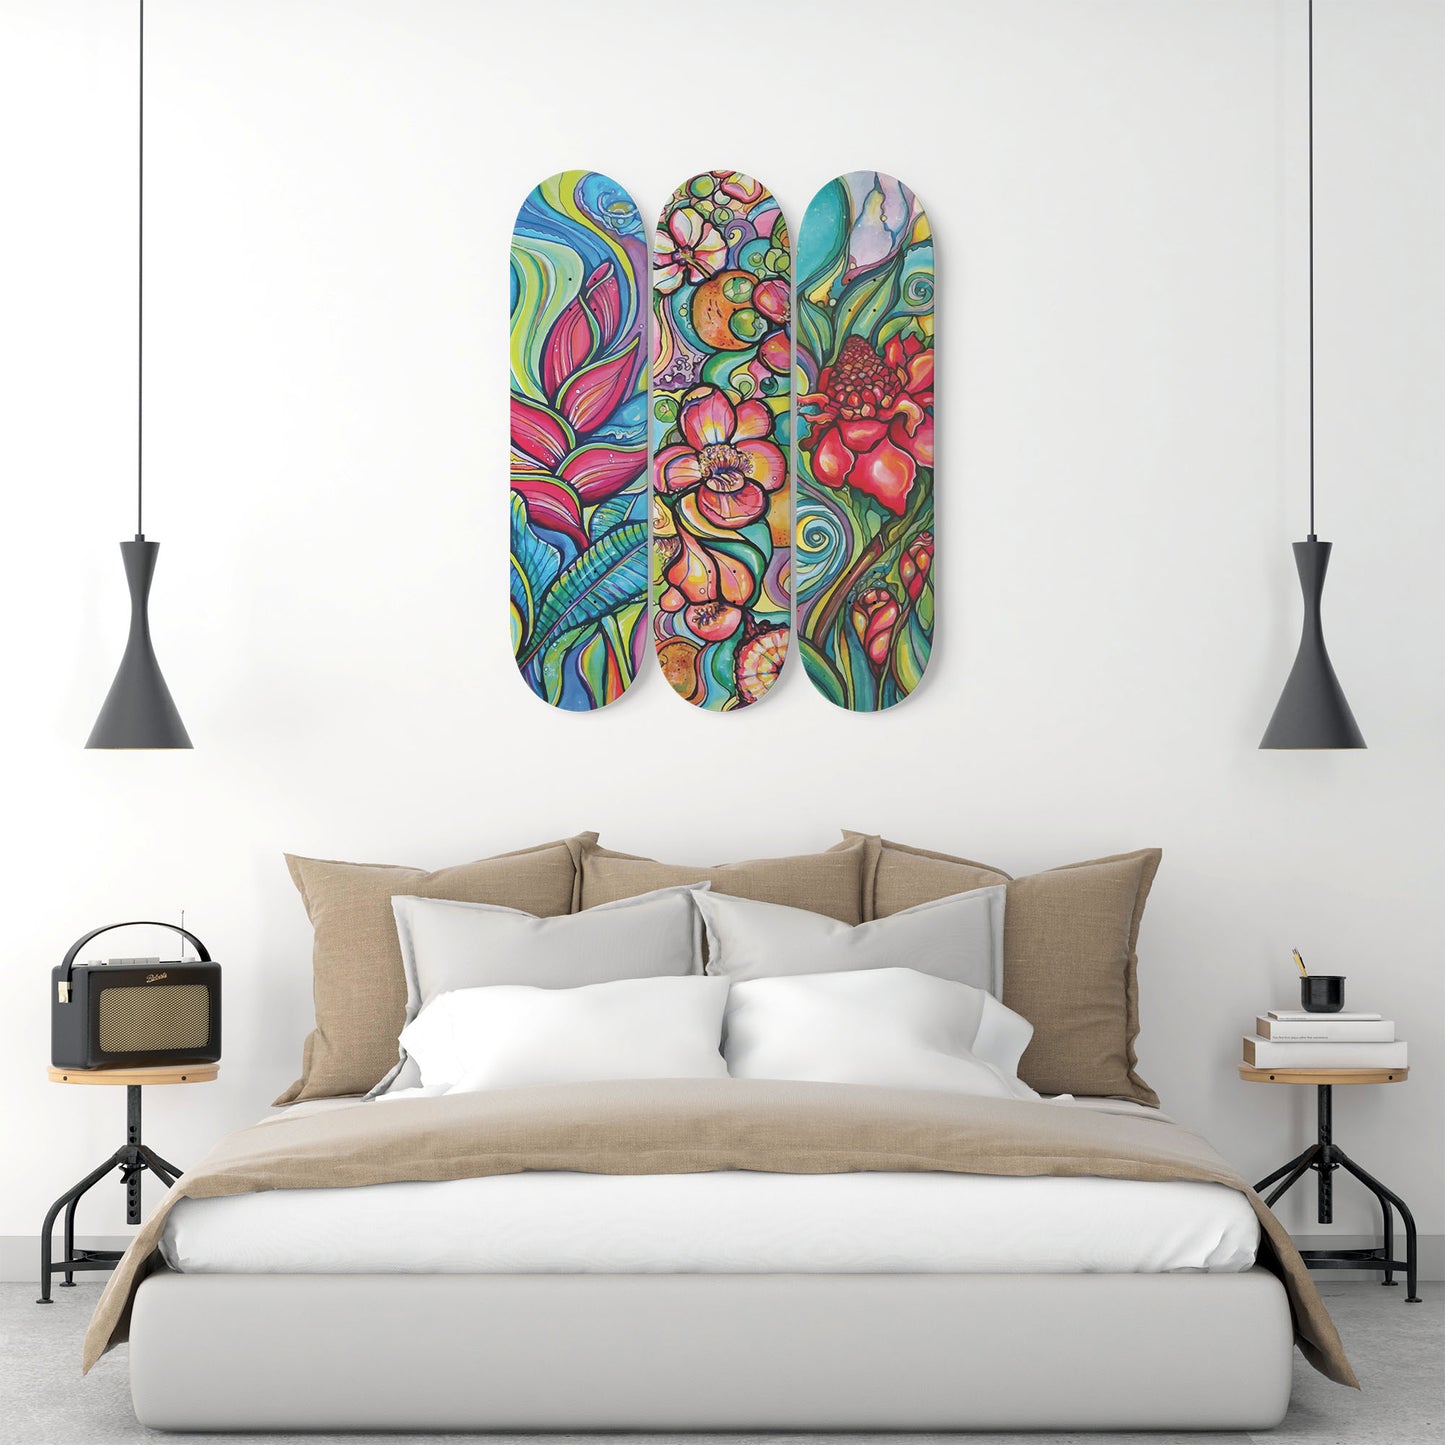 Random Colorful Artwork 8  | Skateboard Deck Wall Art, Wall Hanged Room Decoration, Maple Wood, Accent Gift for Home, Aesthetic Wall Art